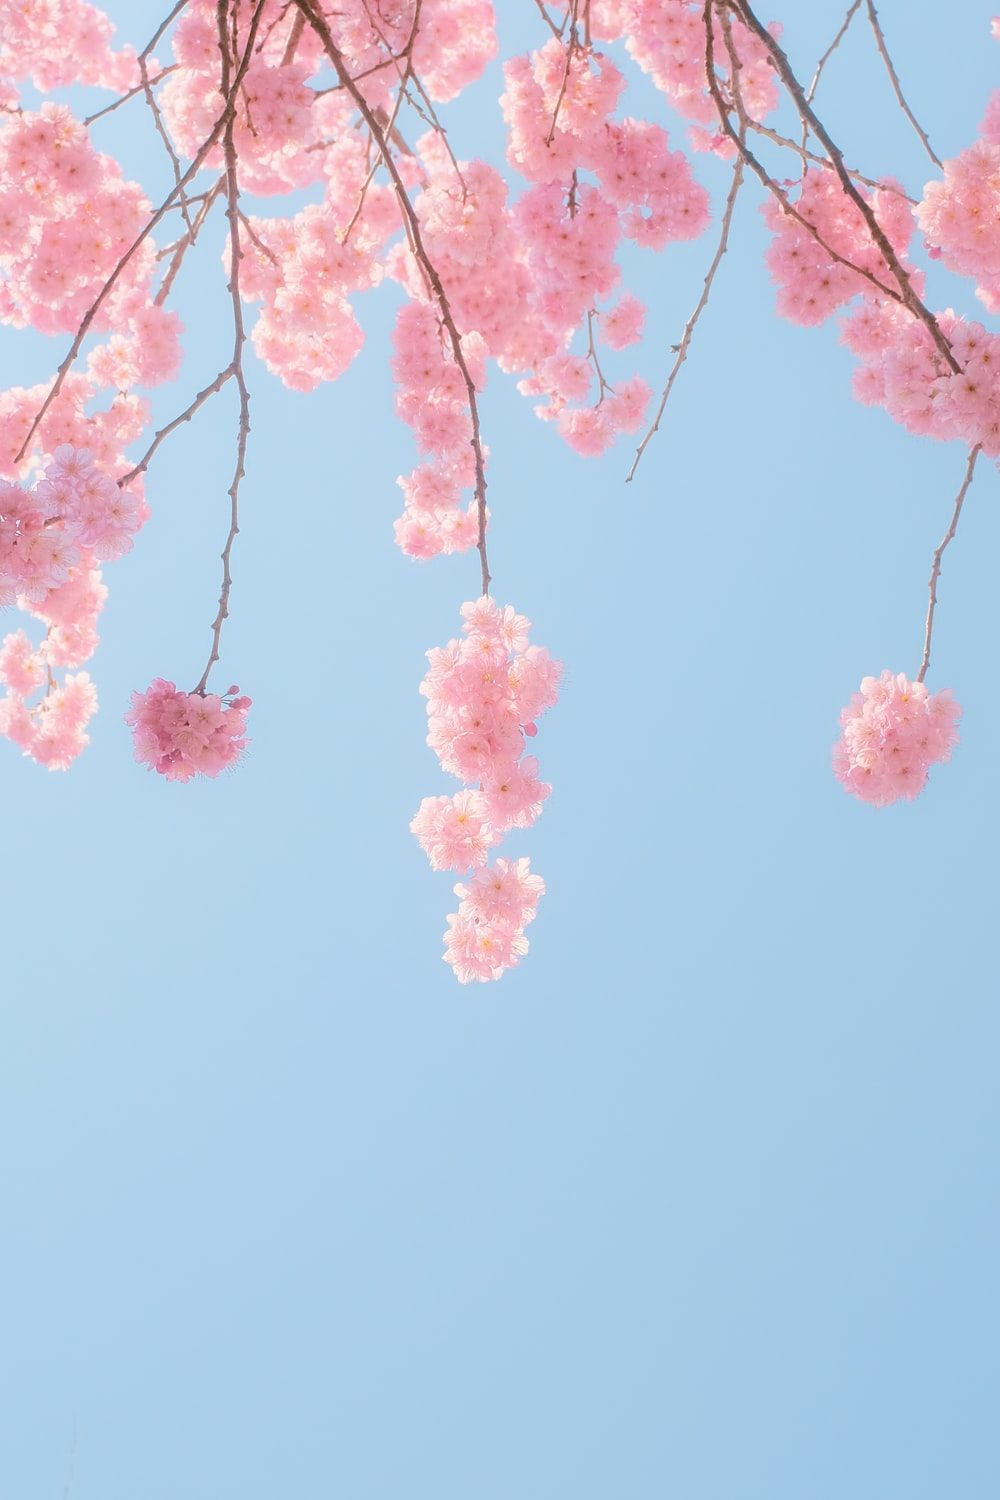 Pink flowers on a tree branch against a blue sky - Cherry blossom, cherry